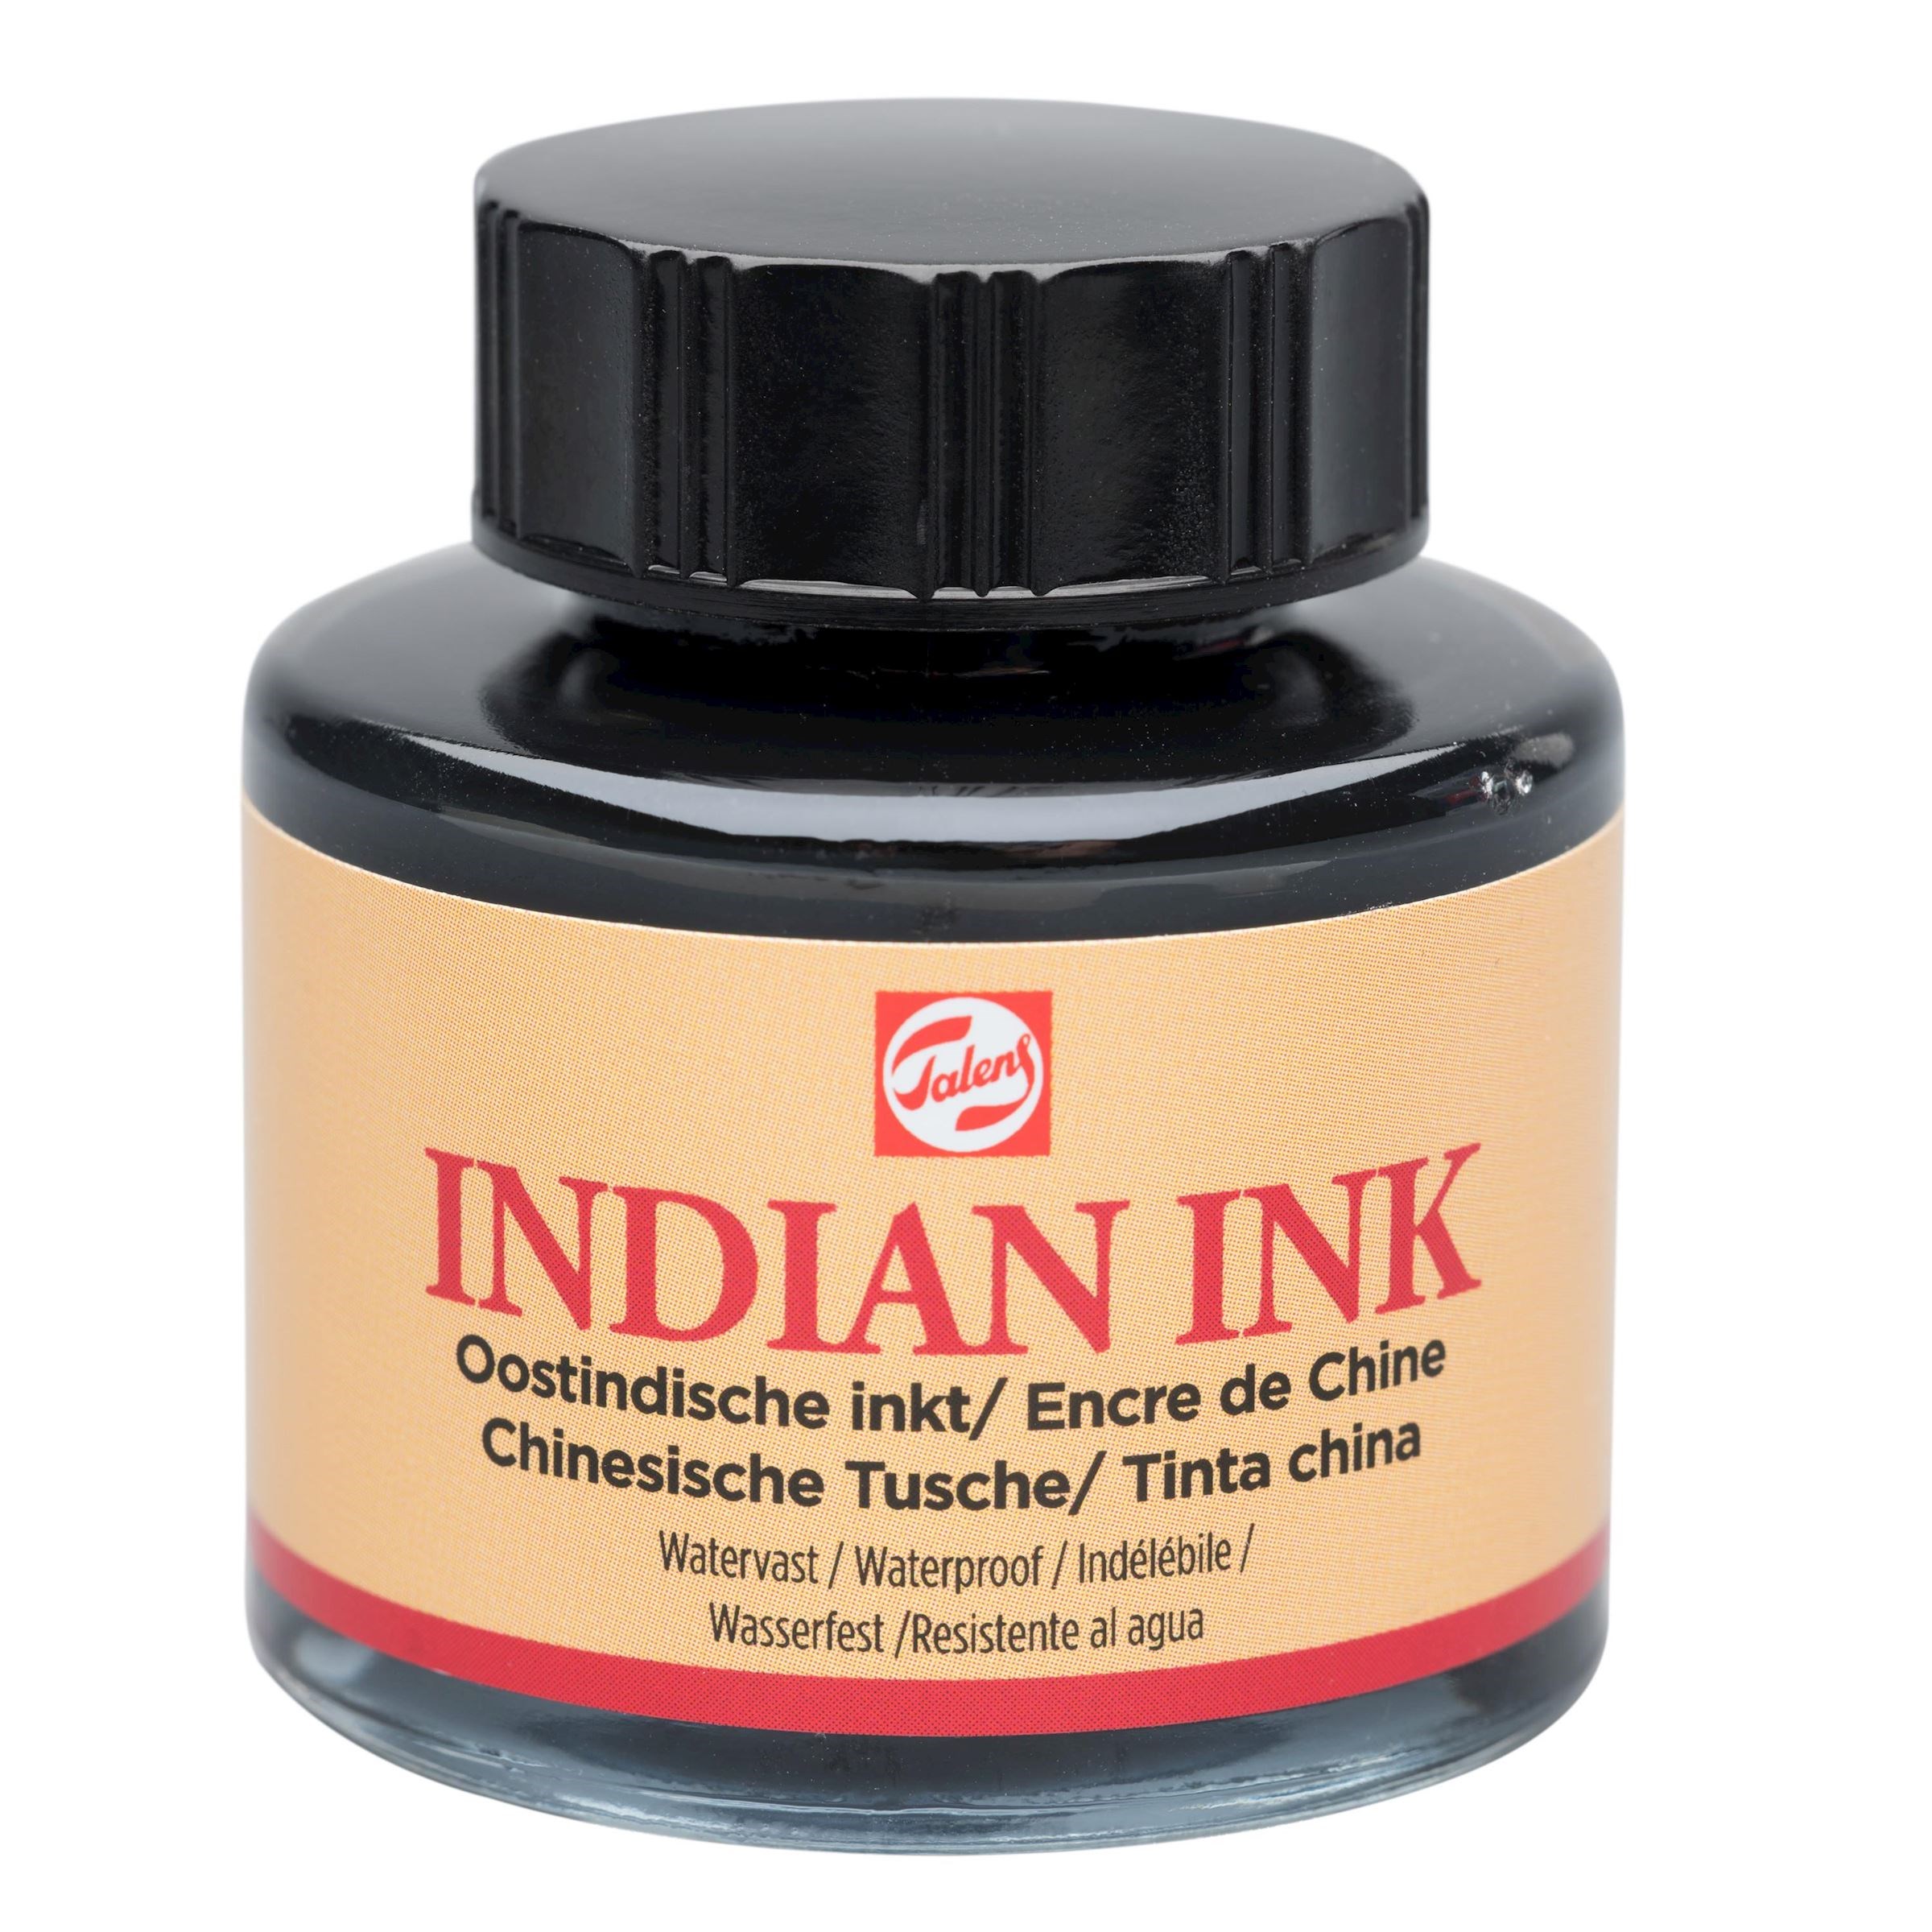 Ink indian Is India